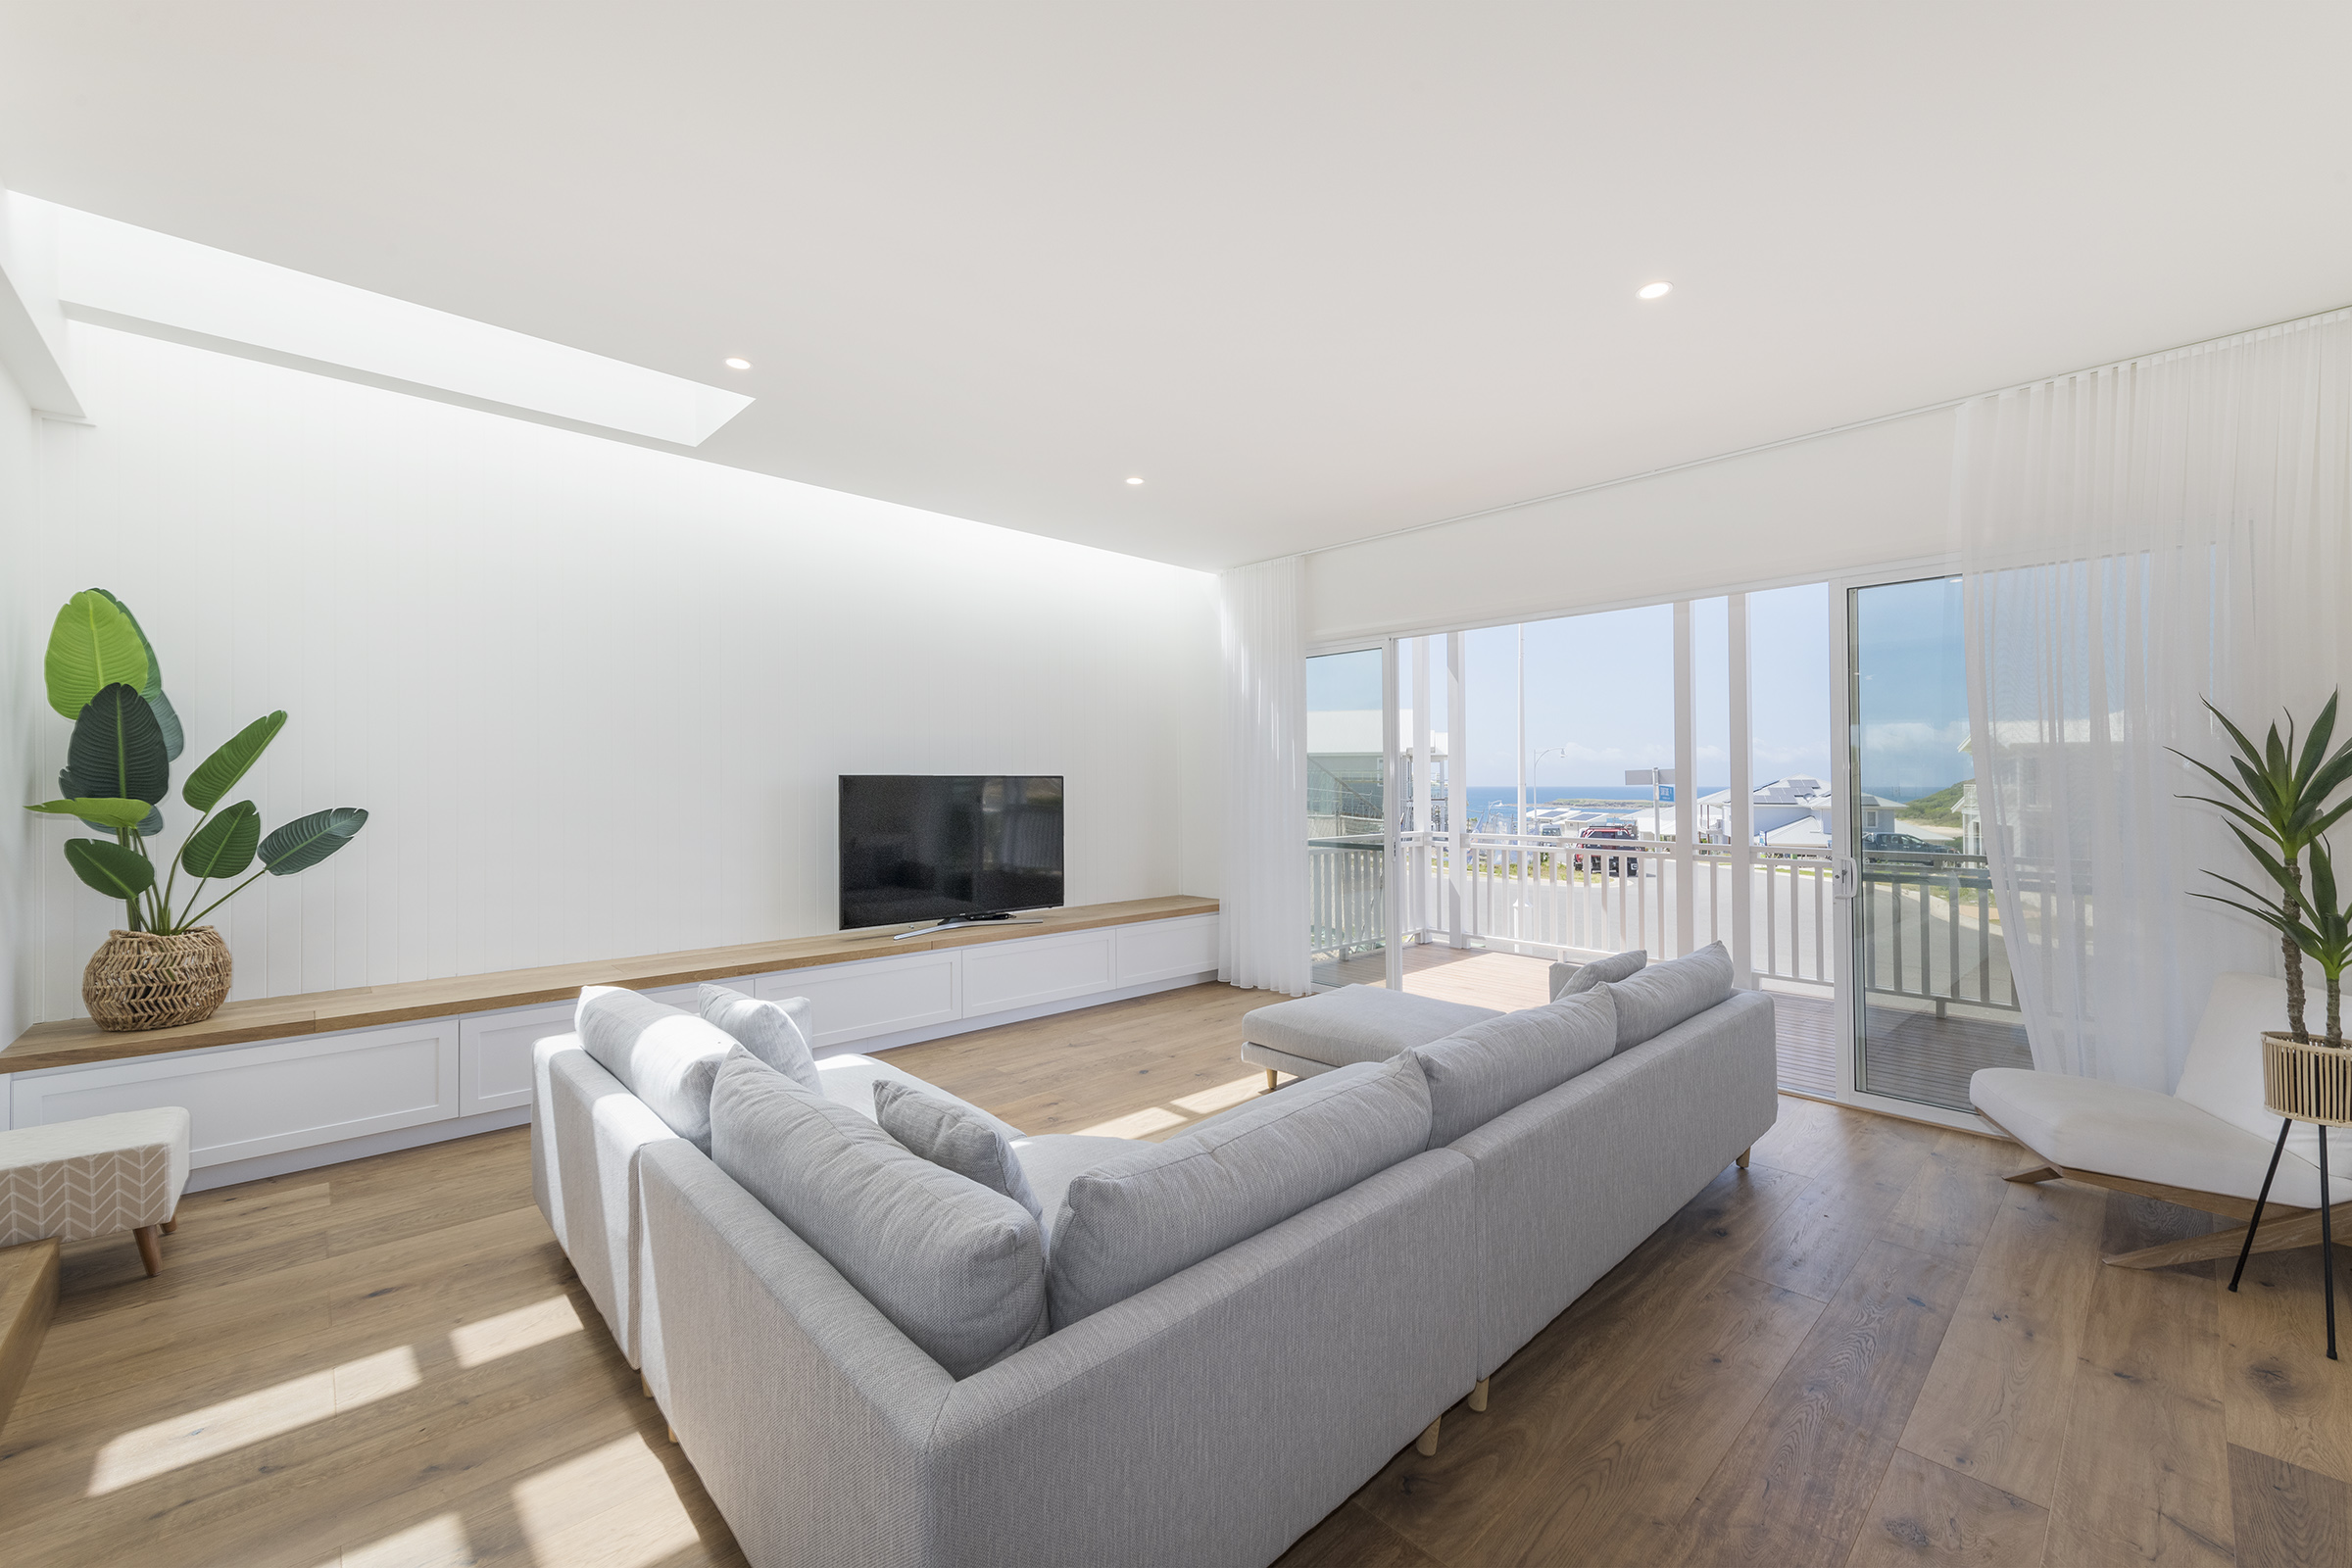 Lounge 1 - Catherine Hill Bay Builders